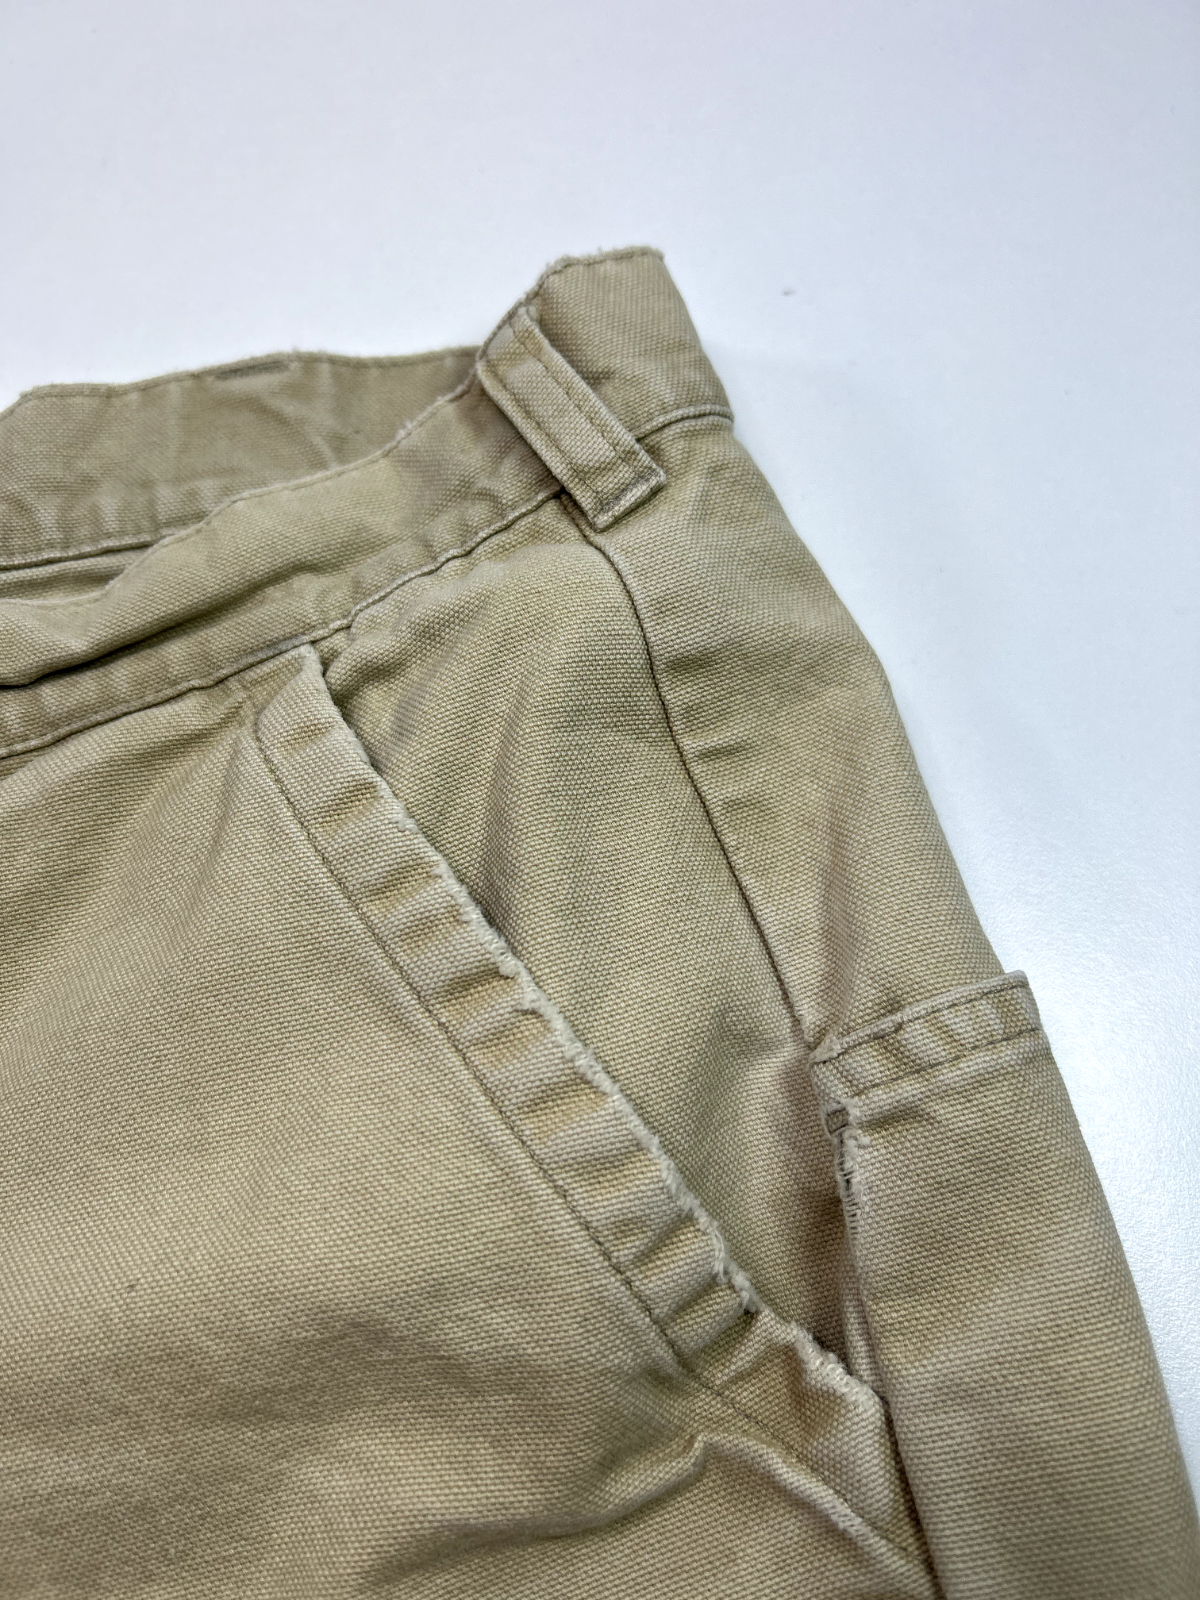 Vintage Patagonia Embroidered Patch Canvas Khaki Shorts Size 37